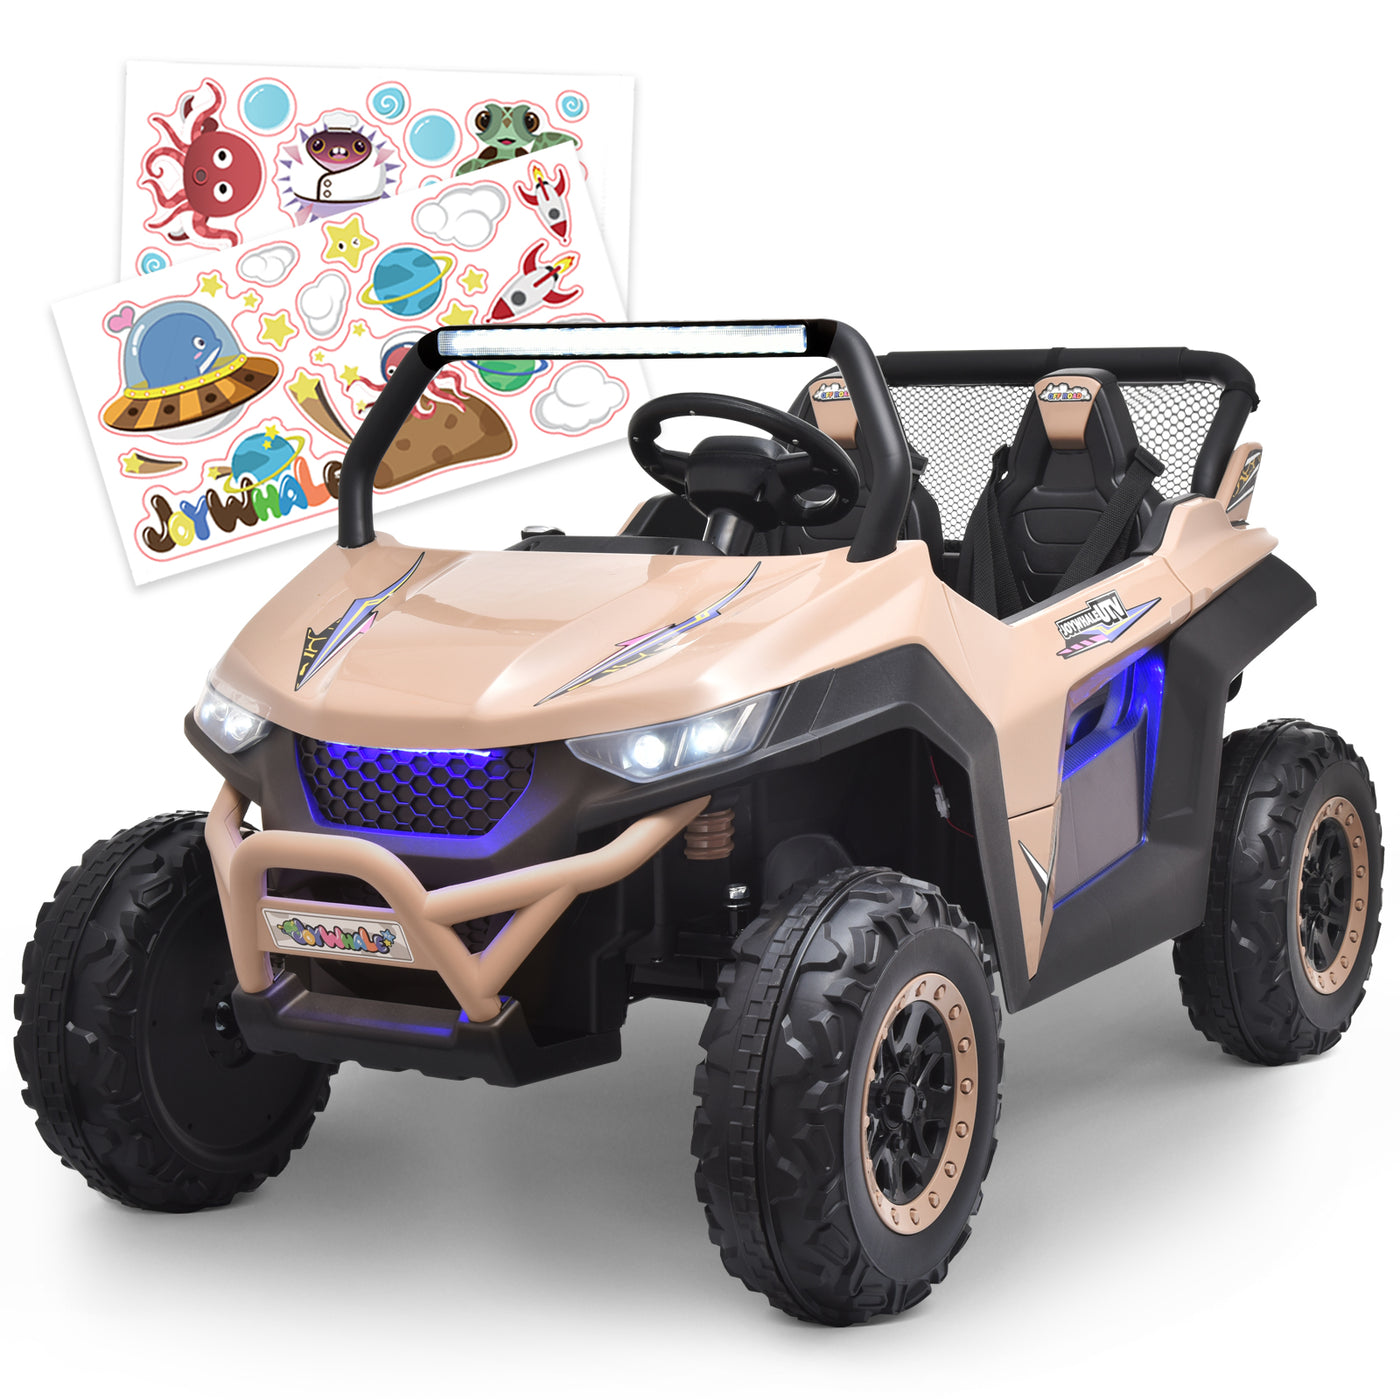 Joywhale 12V 2 Seater Kids Ride on UTV Battery Powered Electric Car for Kids Ages 3-8, with DIY Sticker, Remote Control & Bright Headlights, DP-U20C